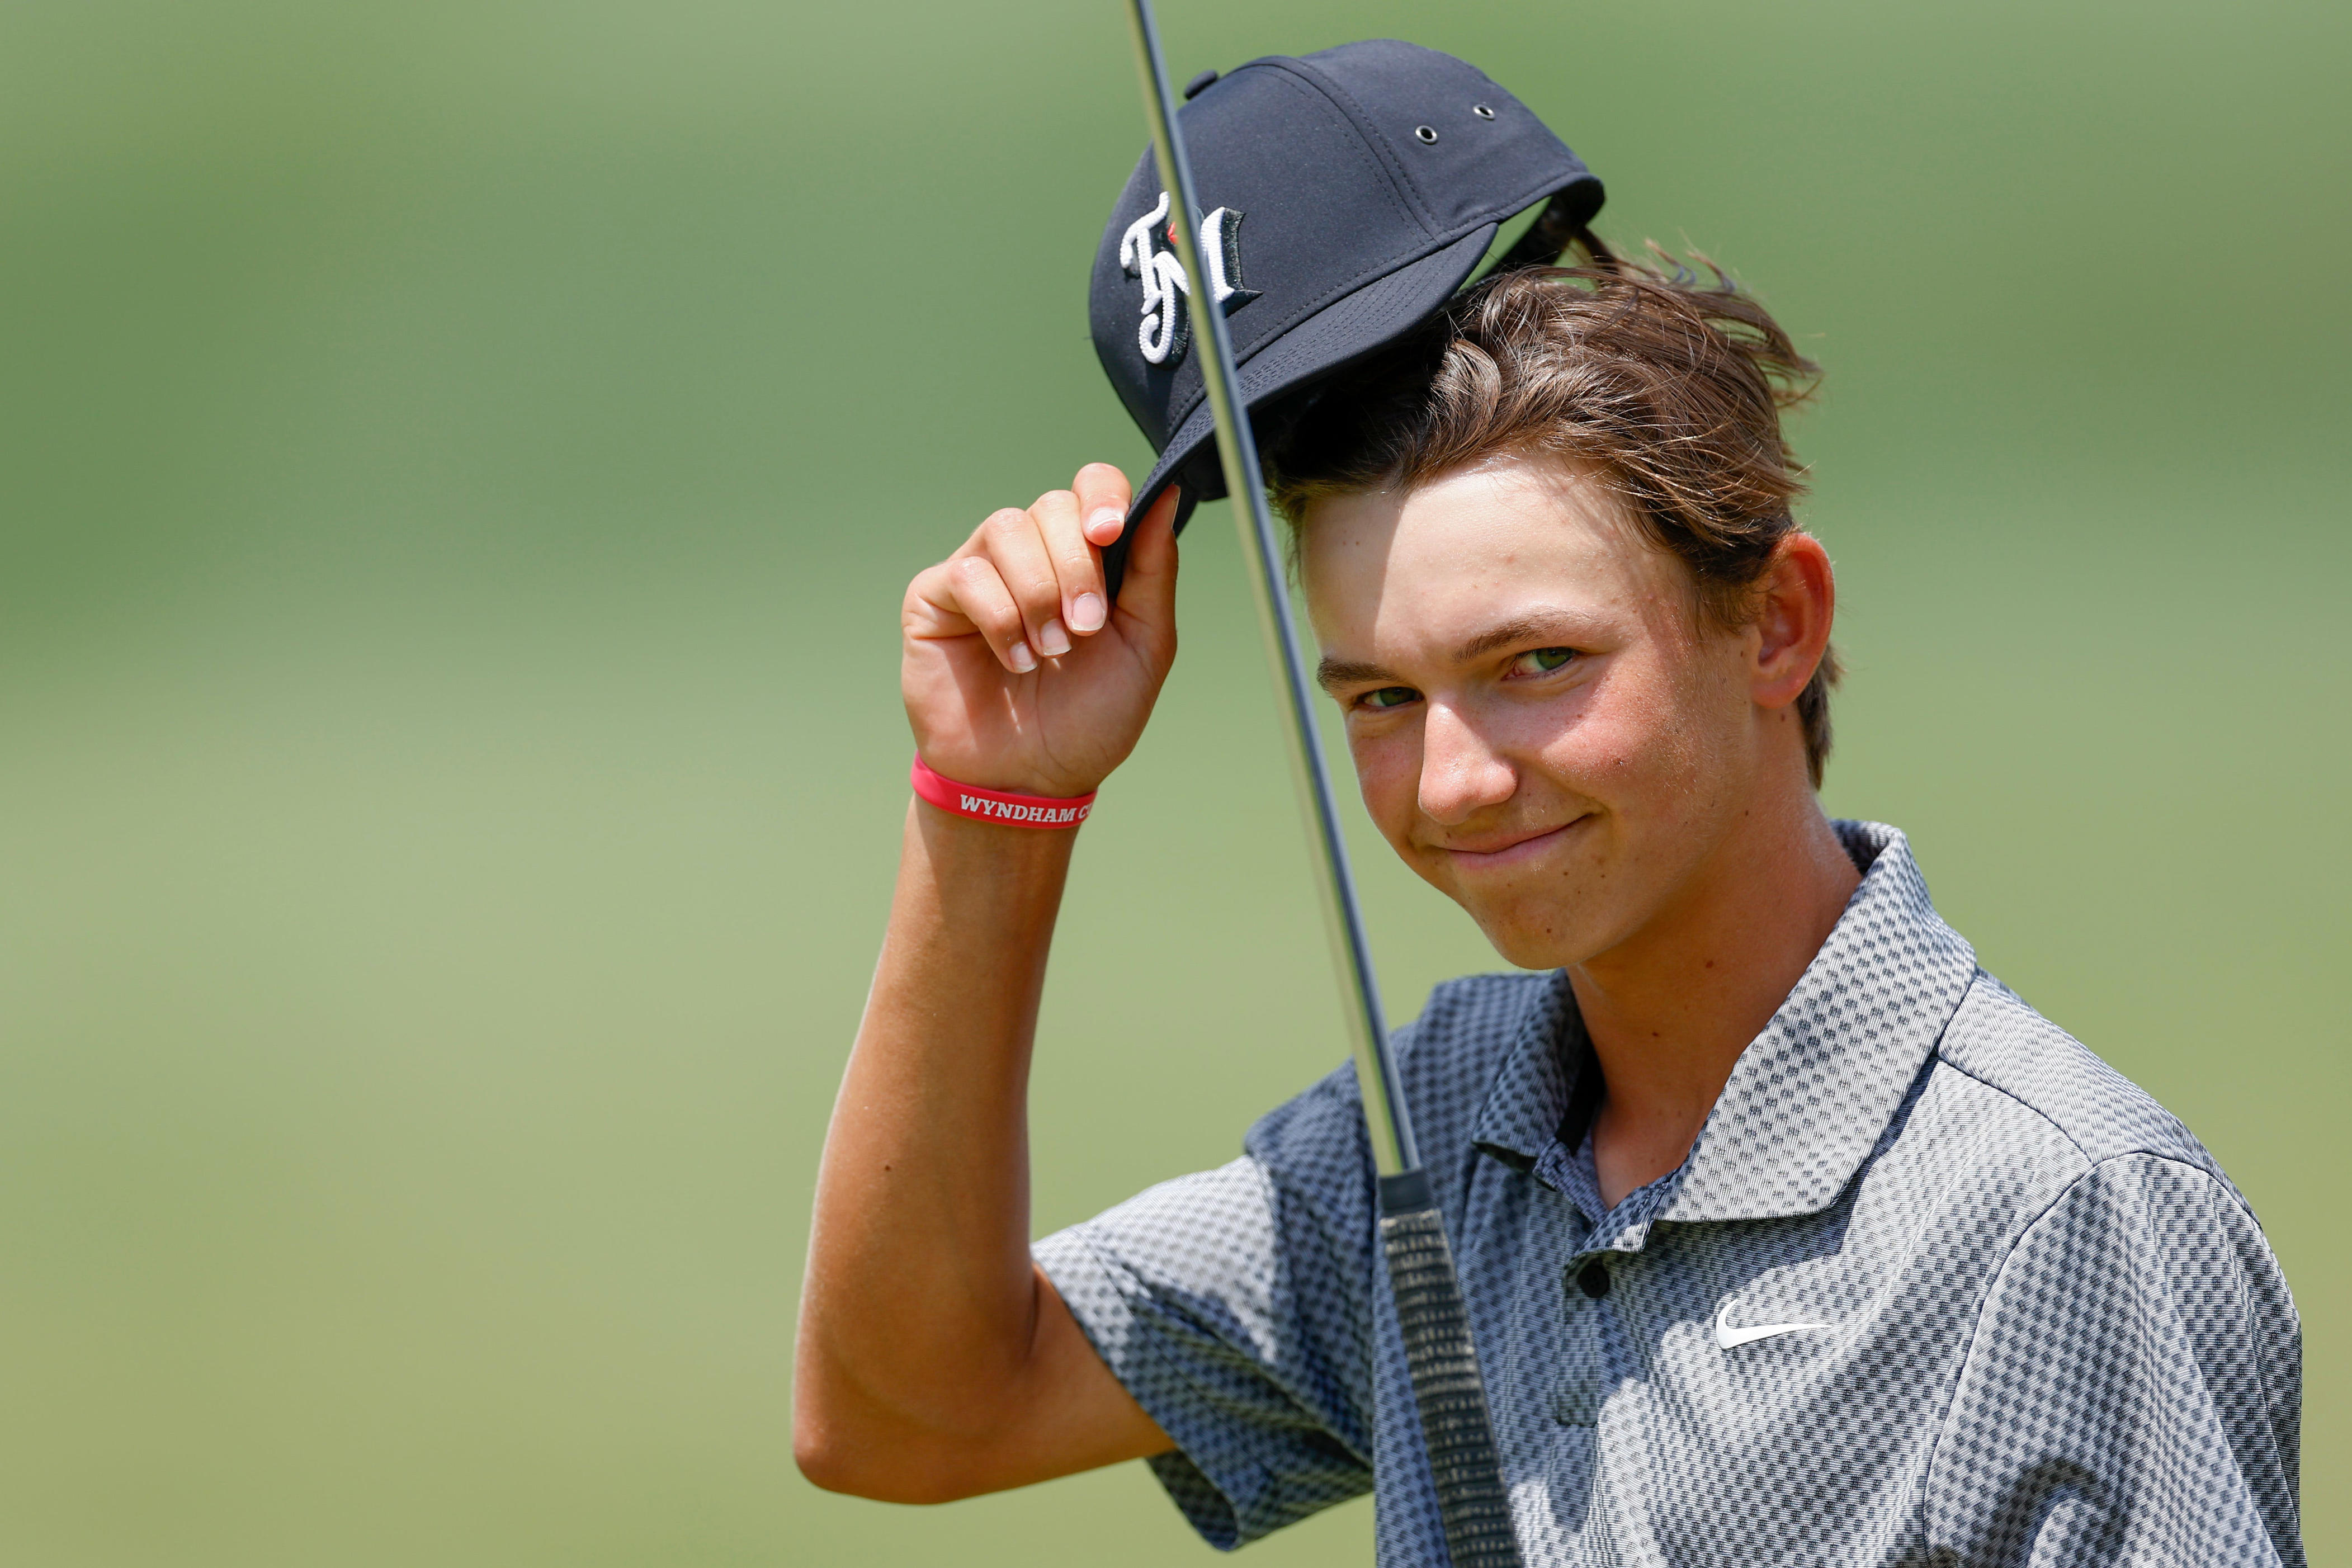 schupak: smells like teen spirit, but are today's golf prodigies really that special?